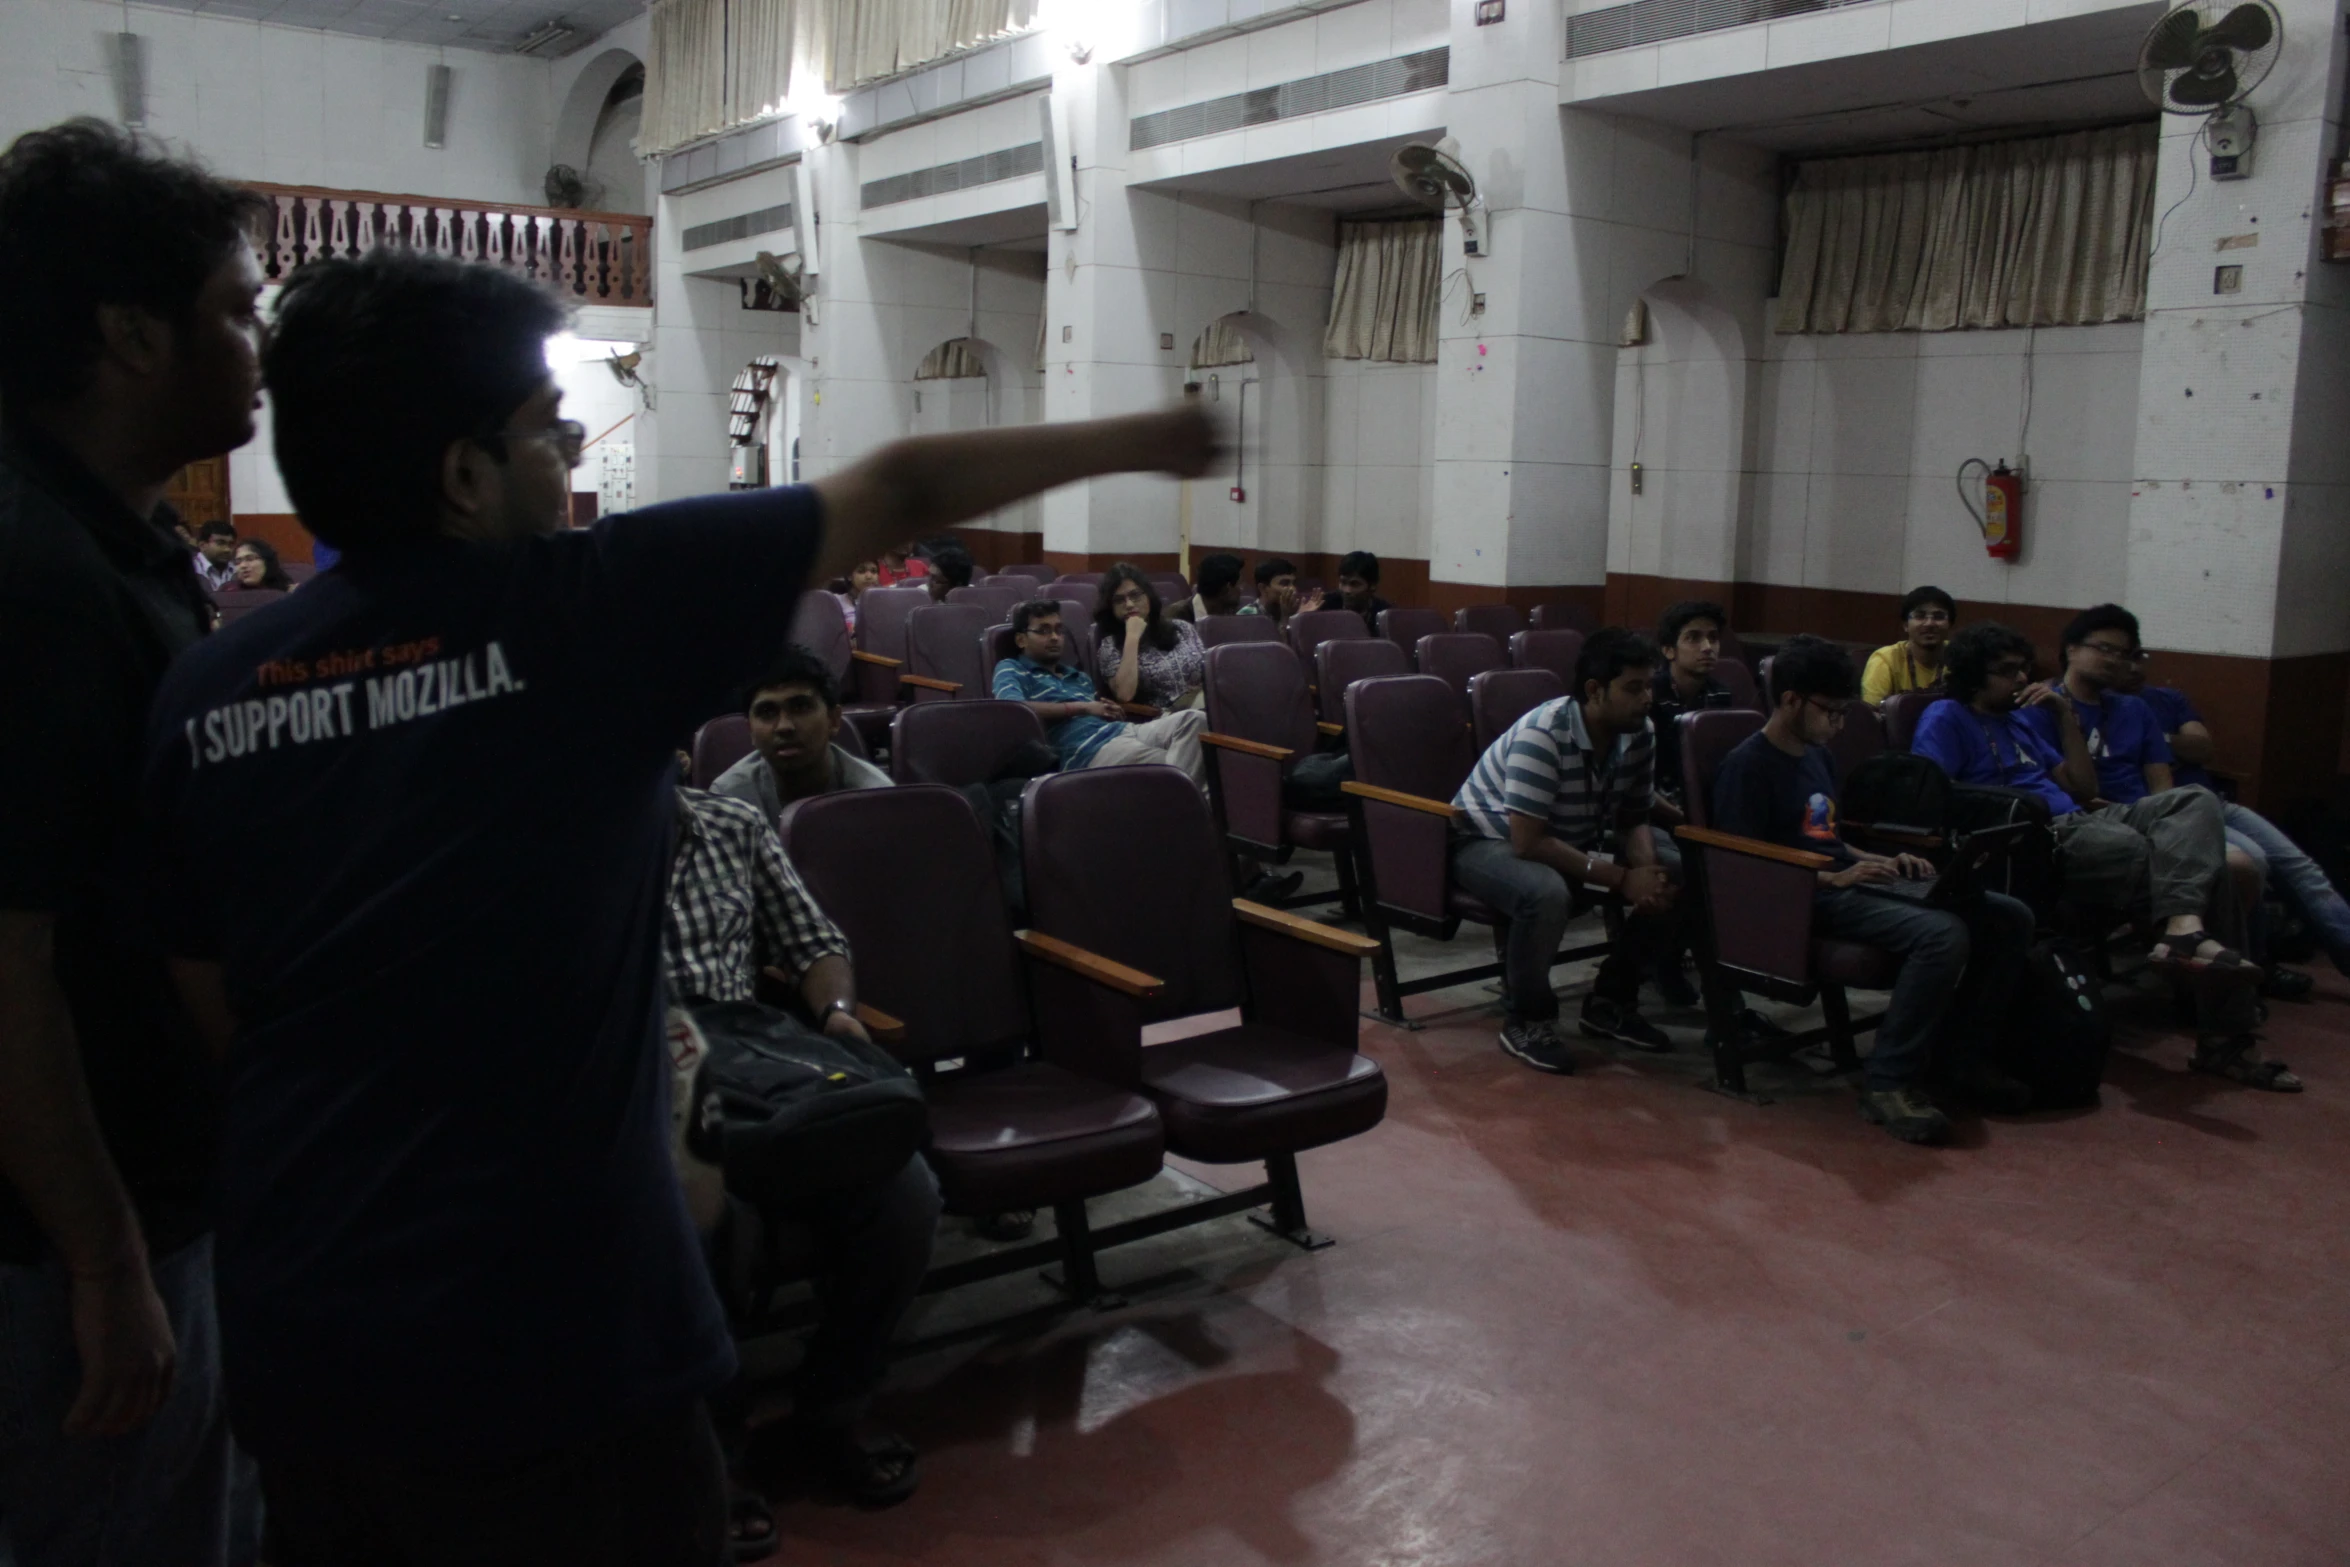 a man directing an audience in front of an auditorium